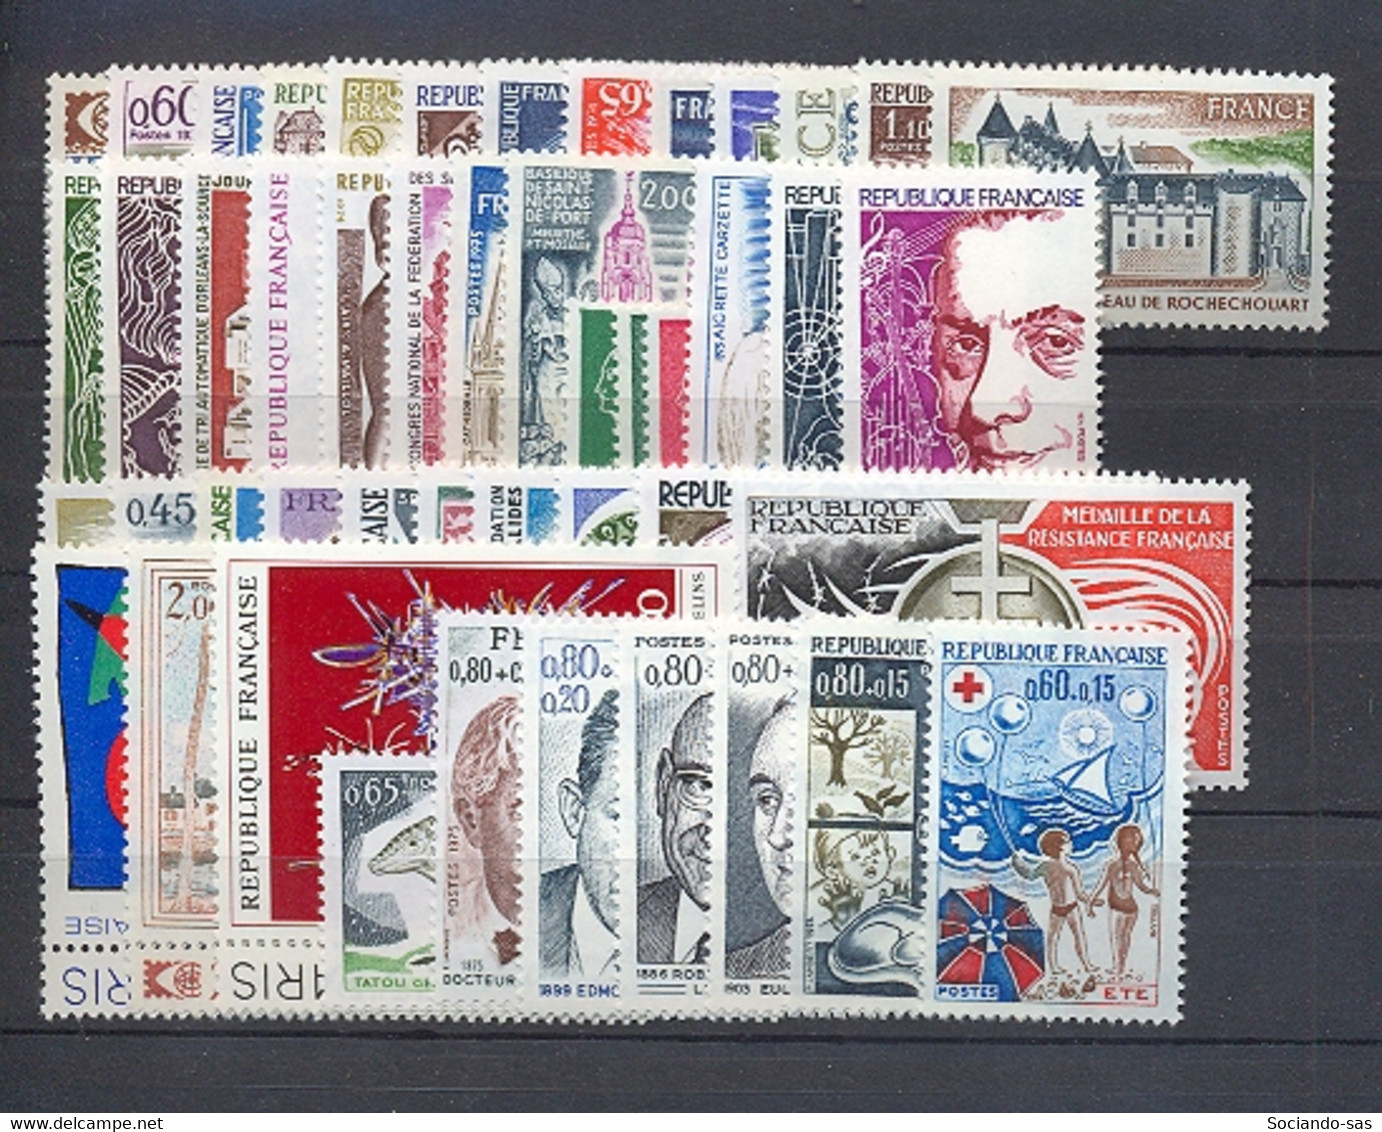 FRANCE - Année Complète 1974 - N°Yv. 1783 à 1829 - Complet - Neuf Luxe ** / MNH / Postfrisch - 1970-1979